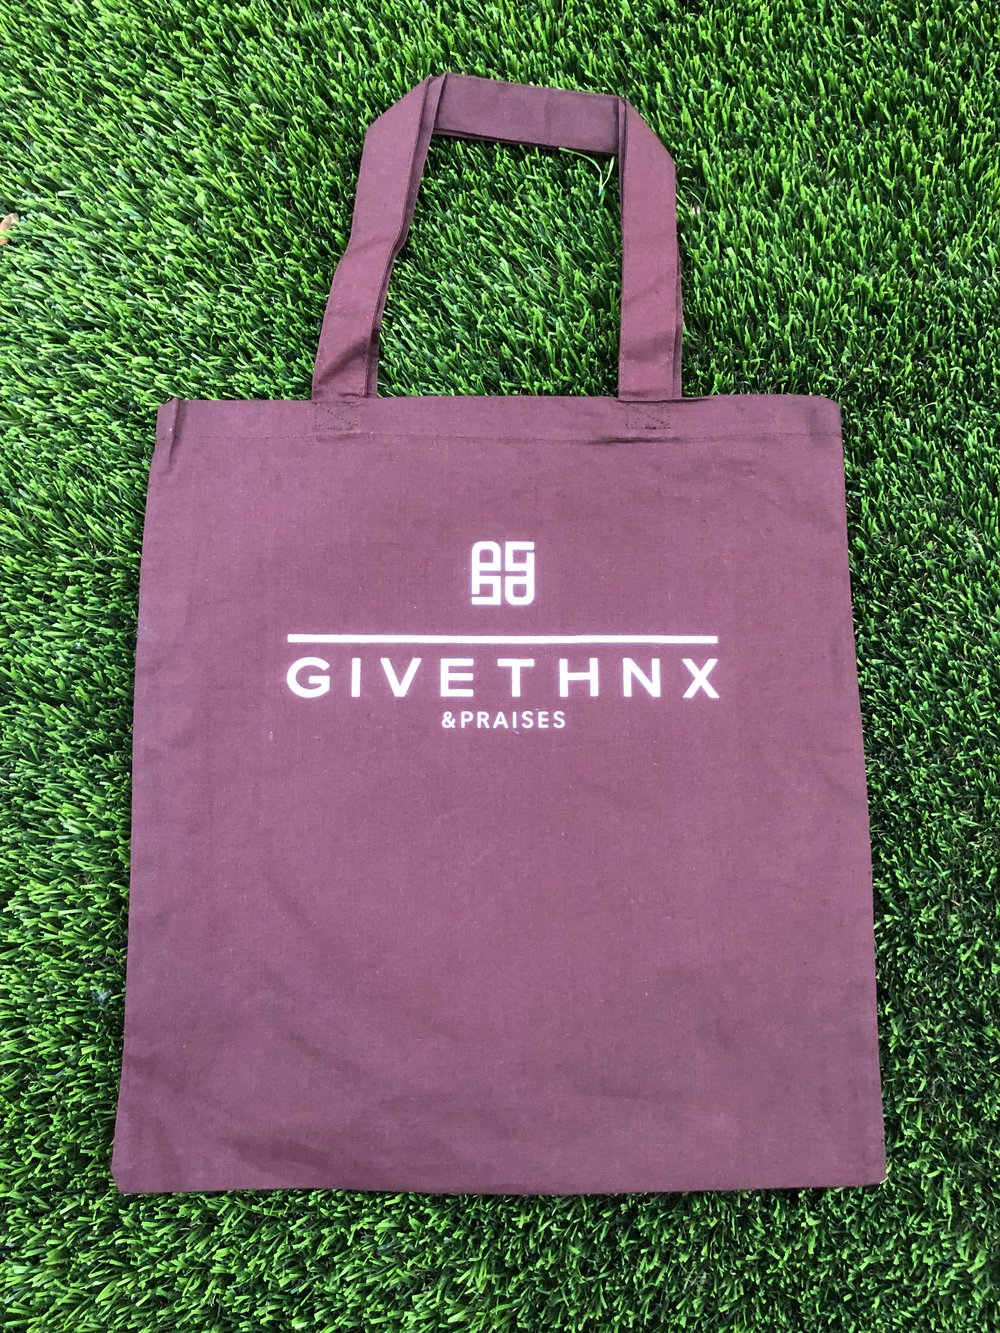 Givethnx & Praises tote bags